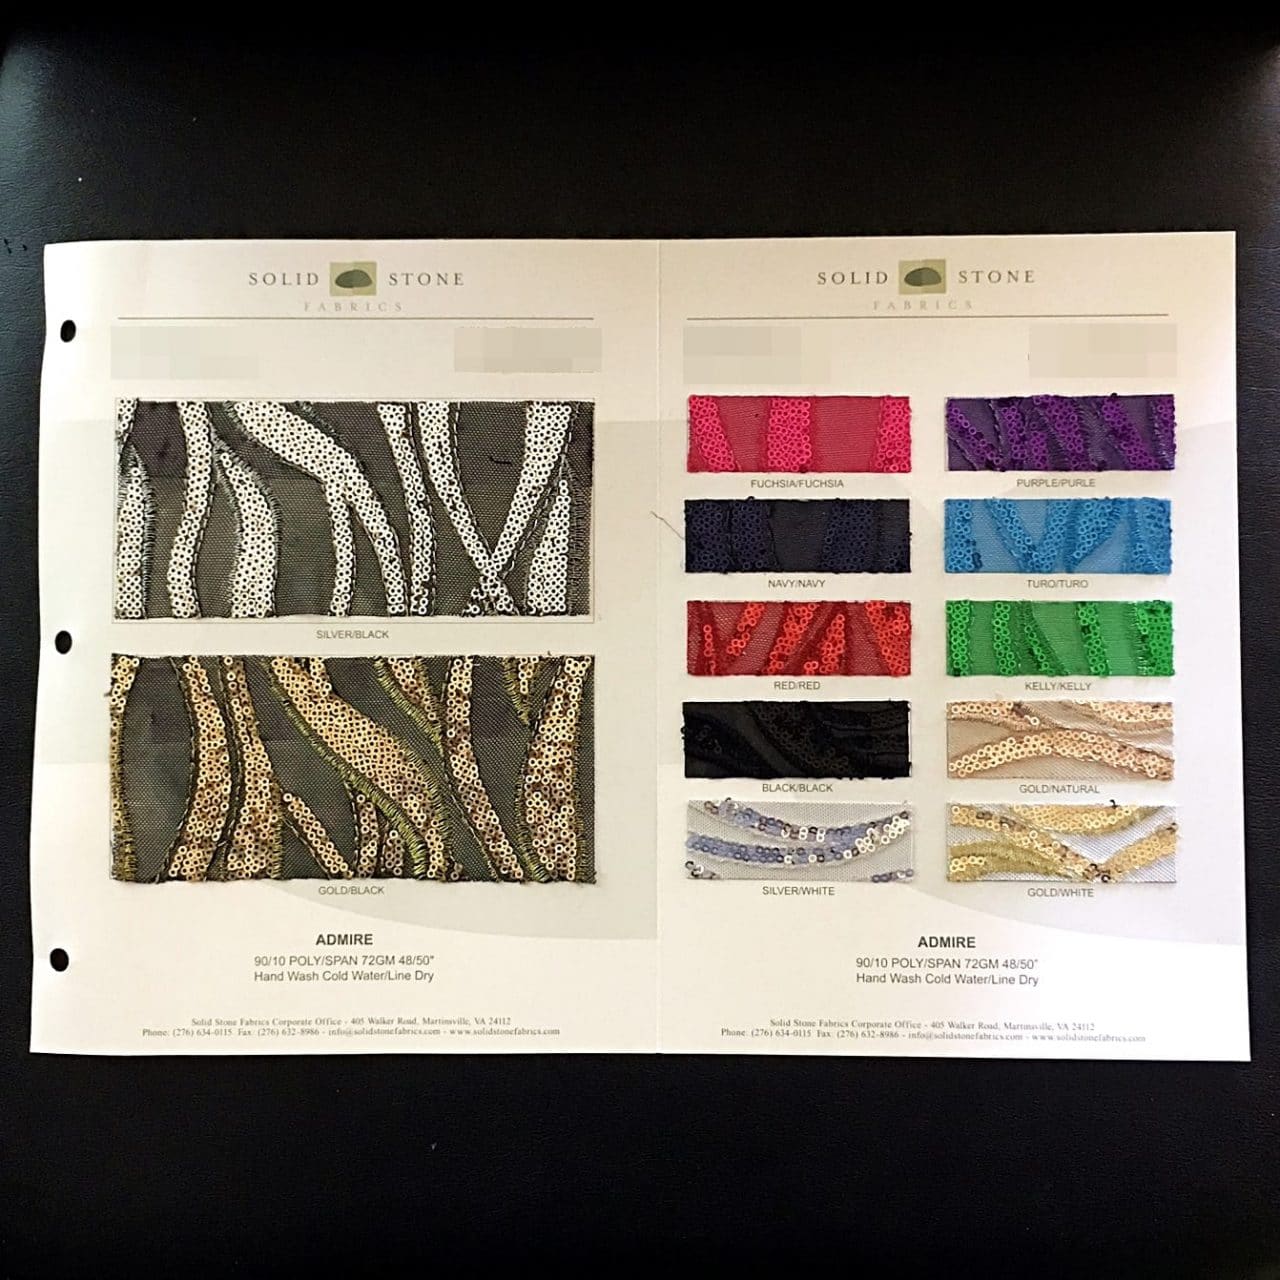 Admire Sequin Mesh Fabric Swatches / Color card features full size "feeler" fabric swatches and all available fabric colors on one card for your convenience.